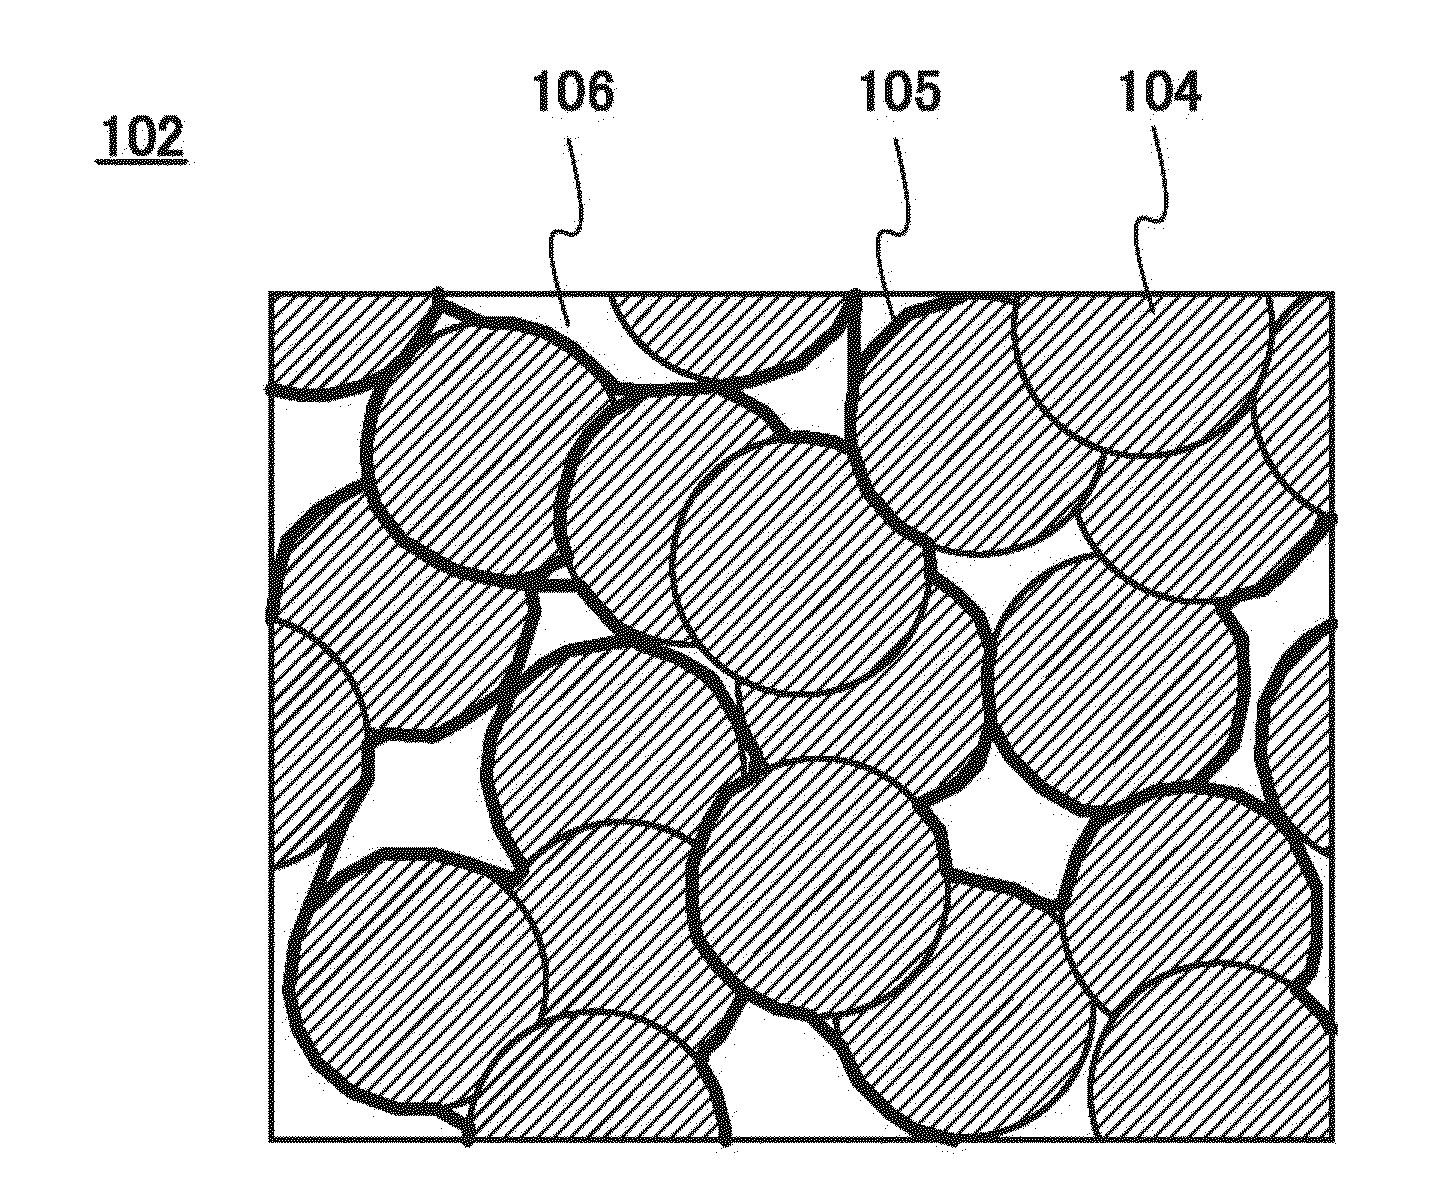 Electrode for storage battery